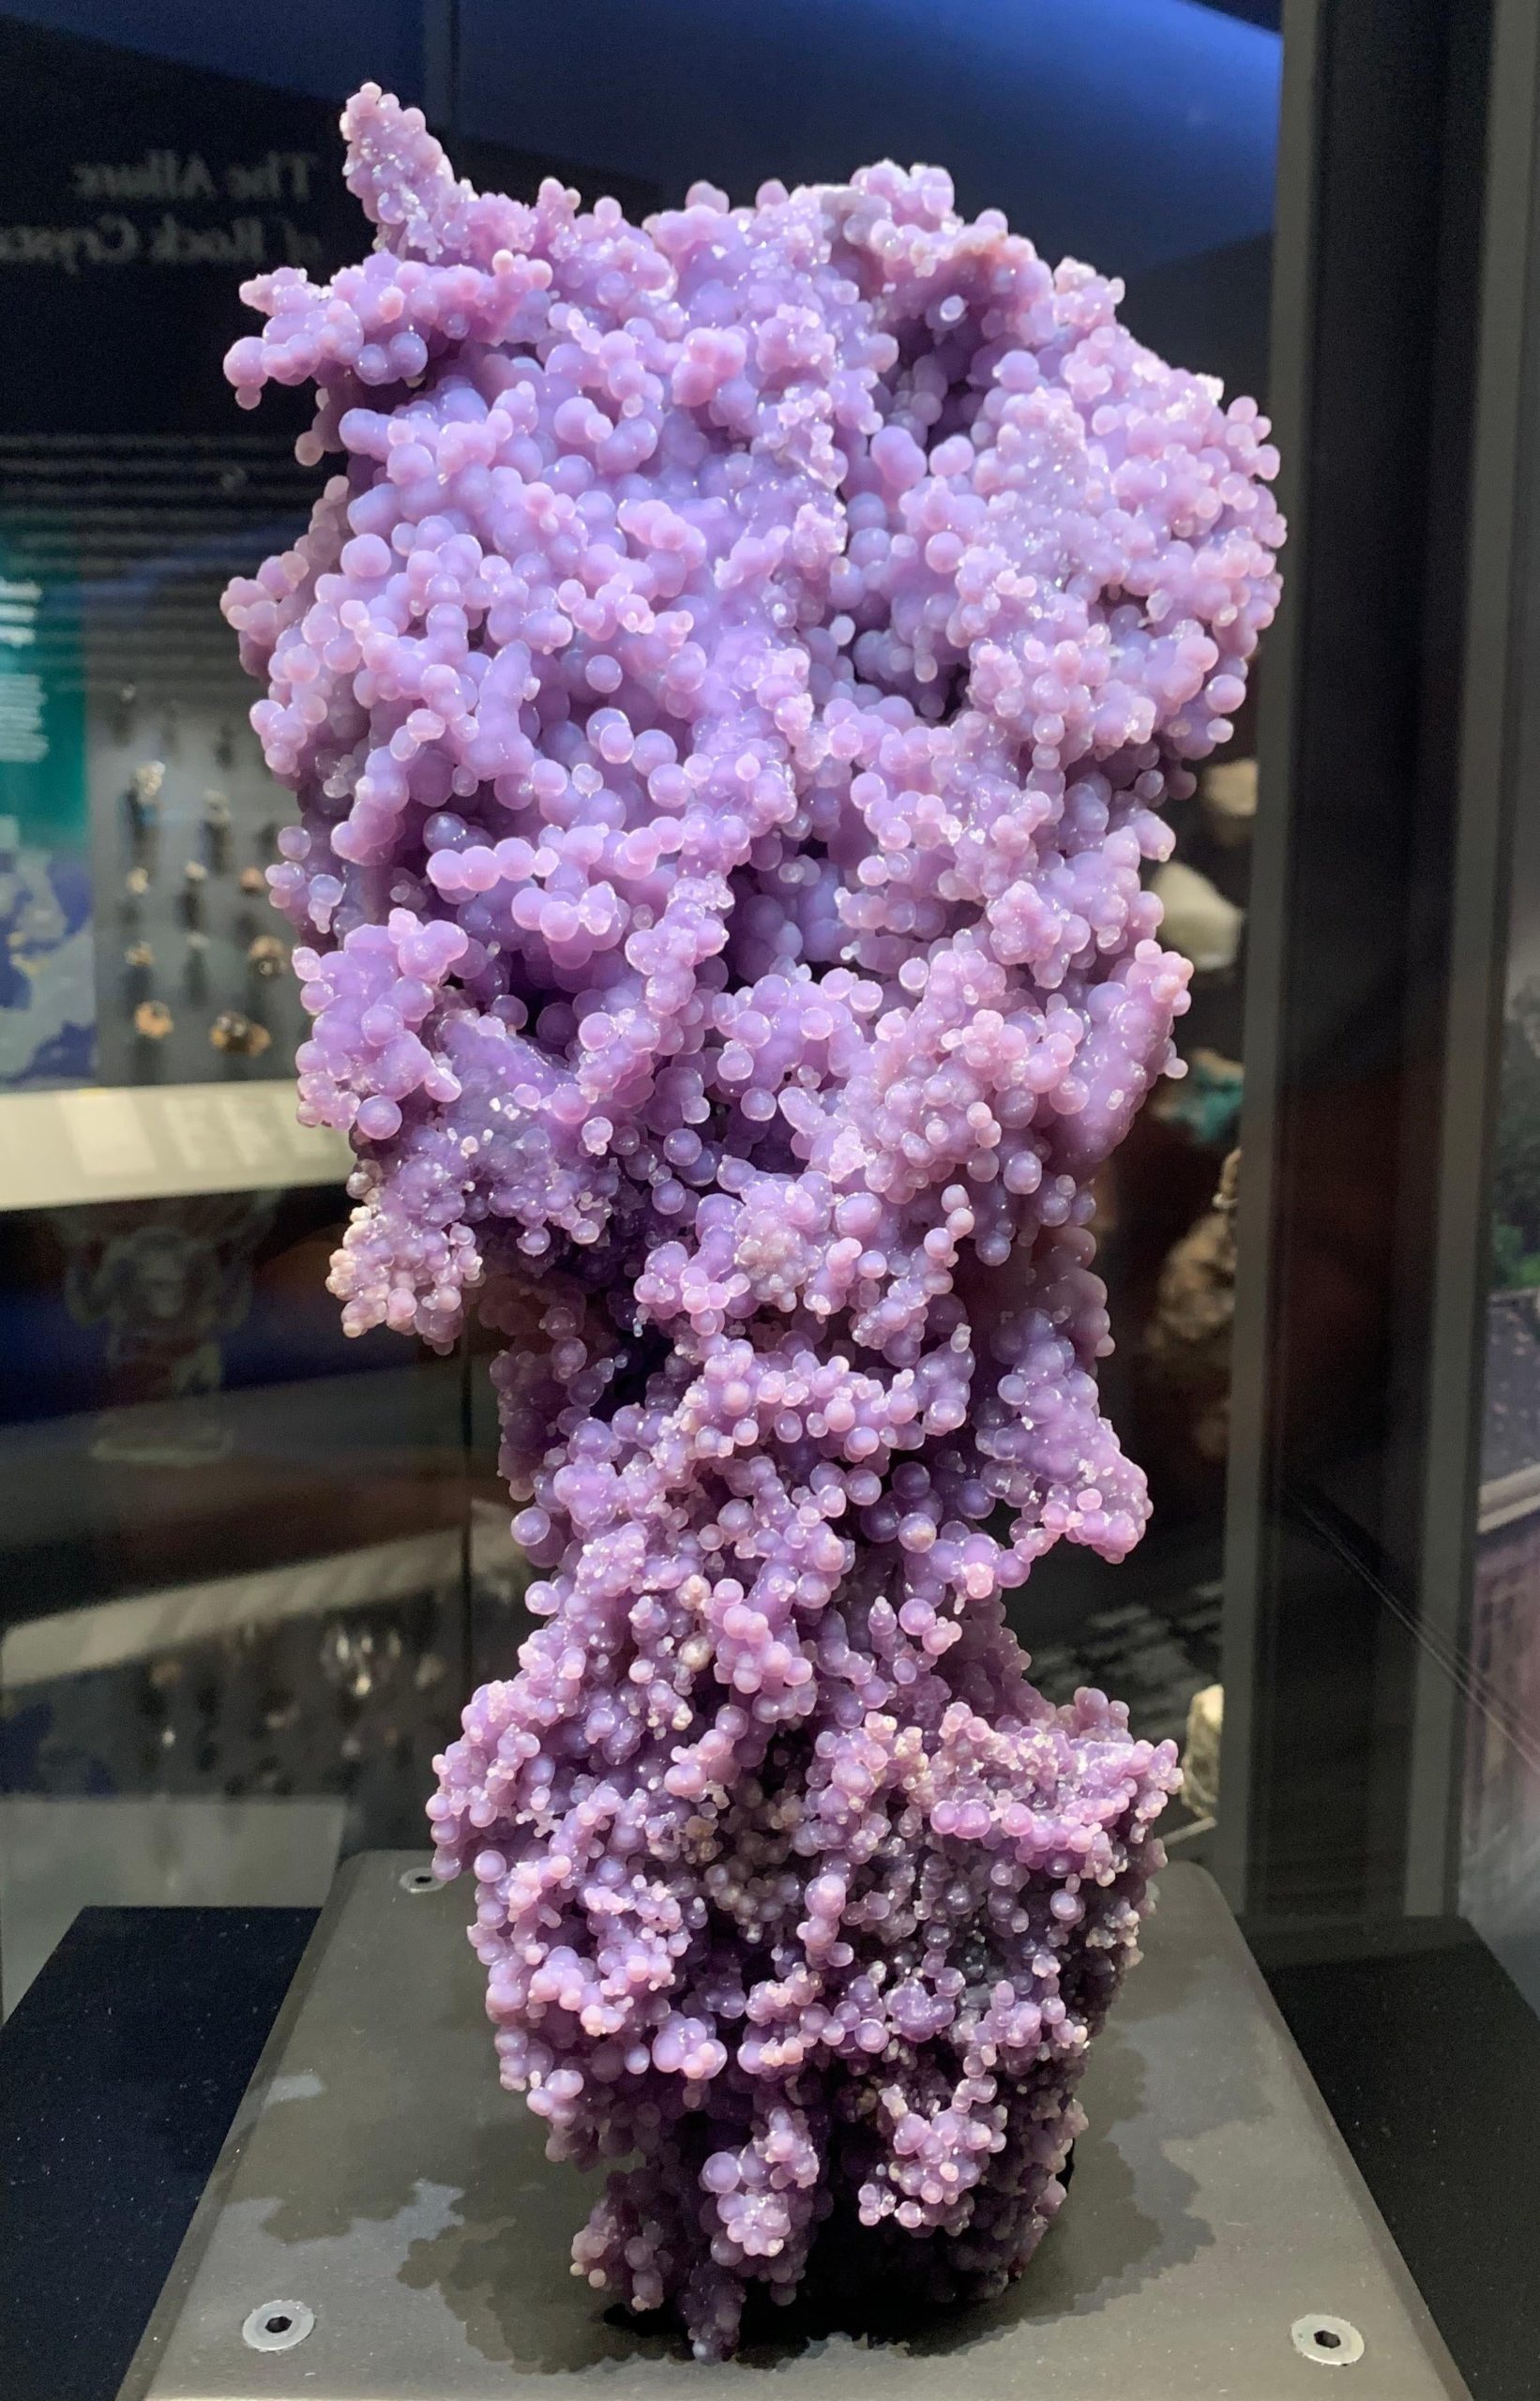 The extraordinary grape agate. (Image: Isaac Schultz)